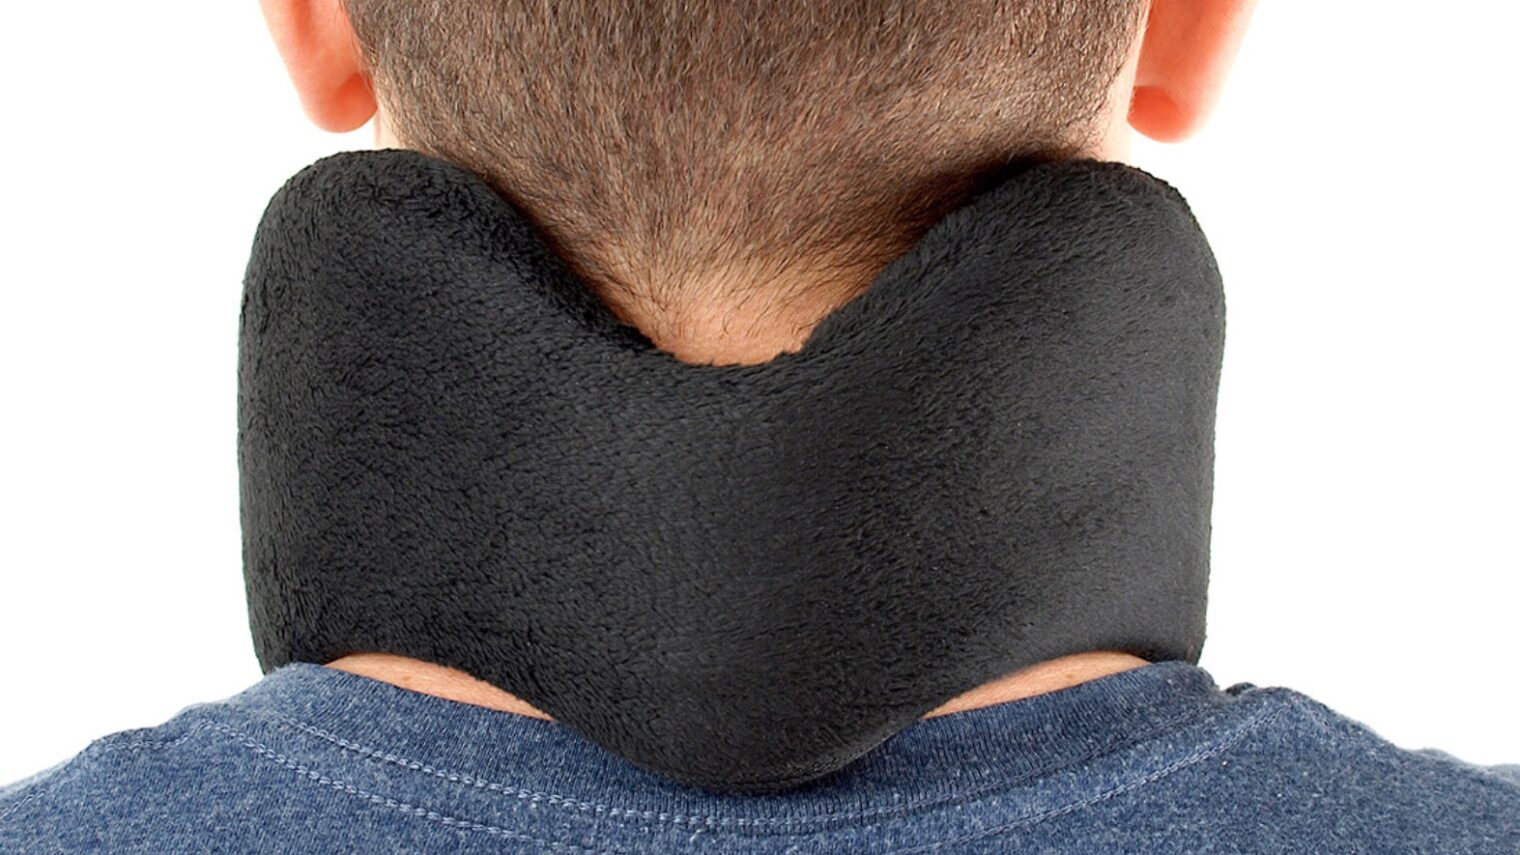 MotionCure sends pulses to the brain through both the median nerve at the back of the neck and the inner ear’s vestibular system. Photo: courtesy